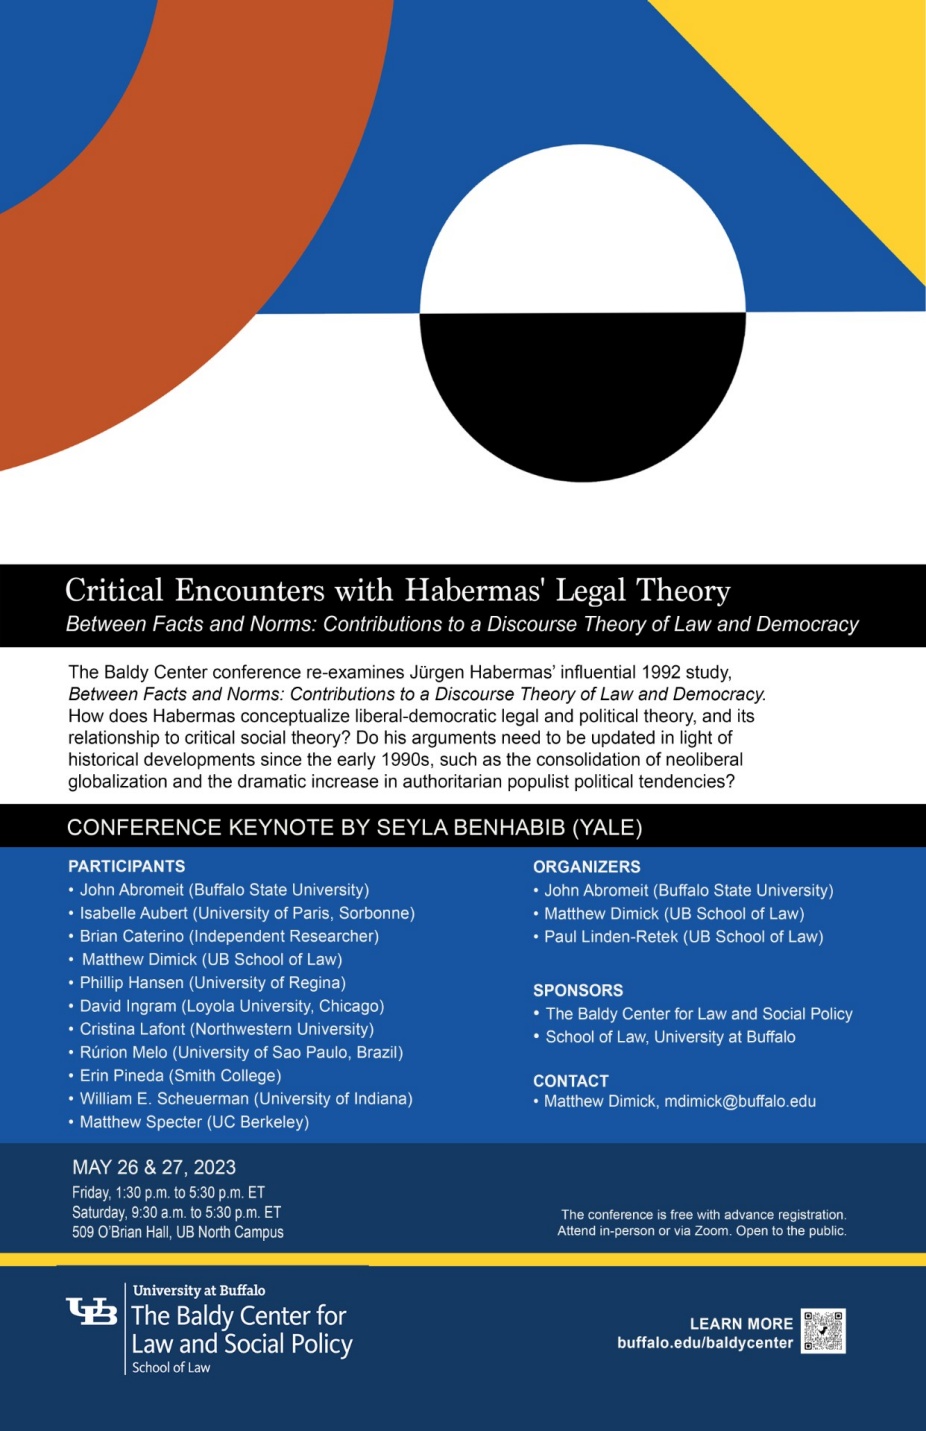 Critical Encounters with Habermas' Legal Theory in Between Facts and Norms. 